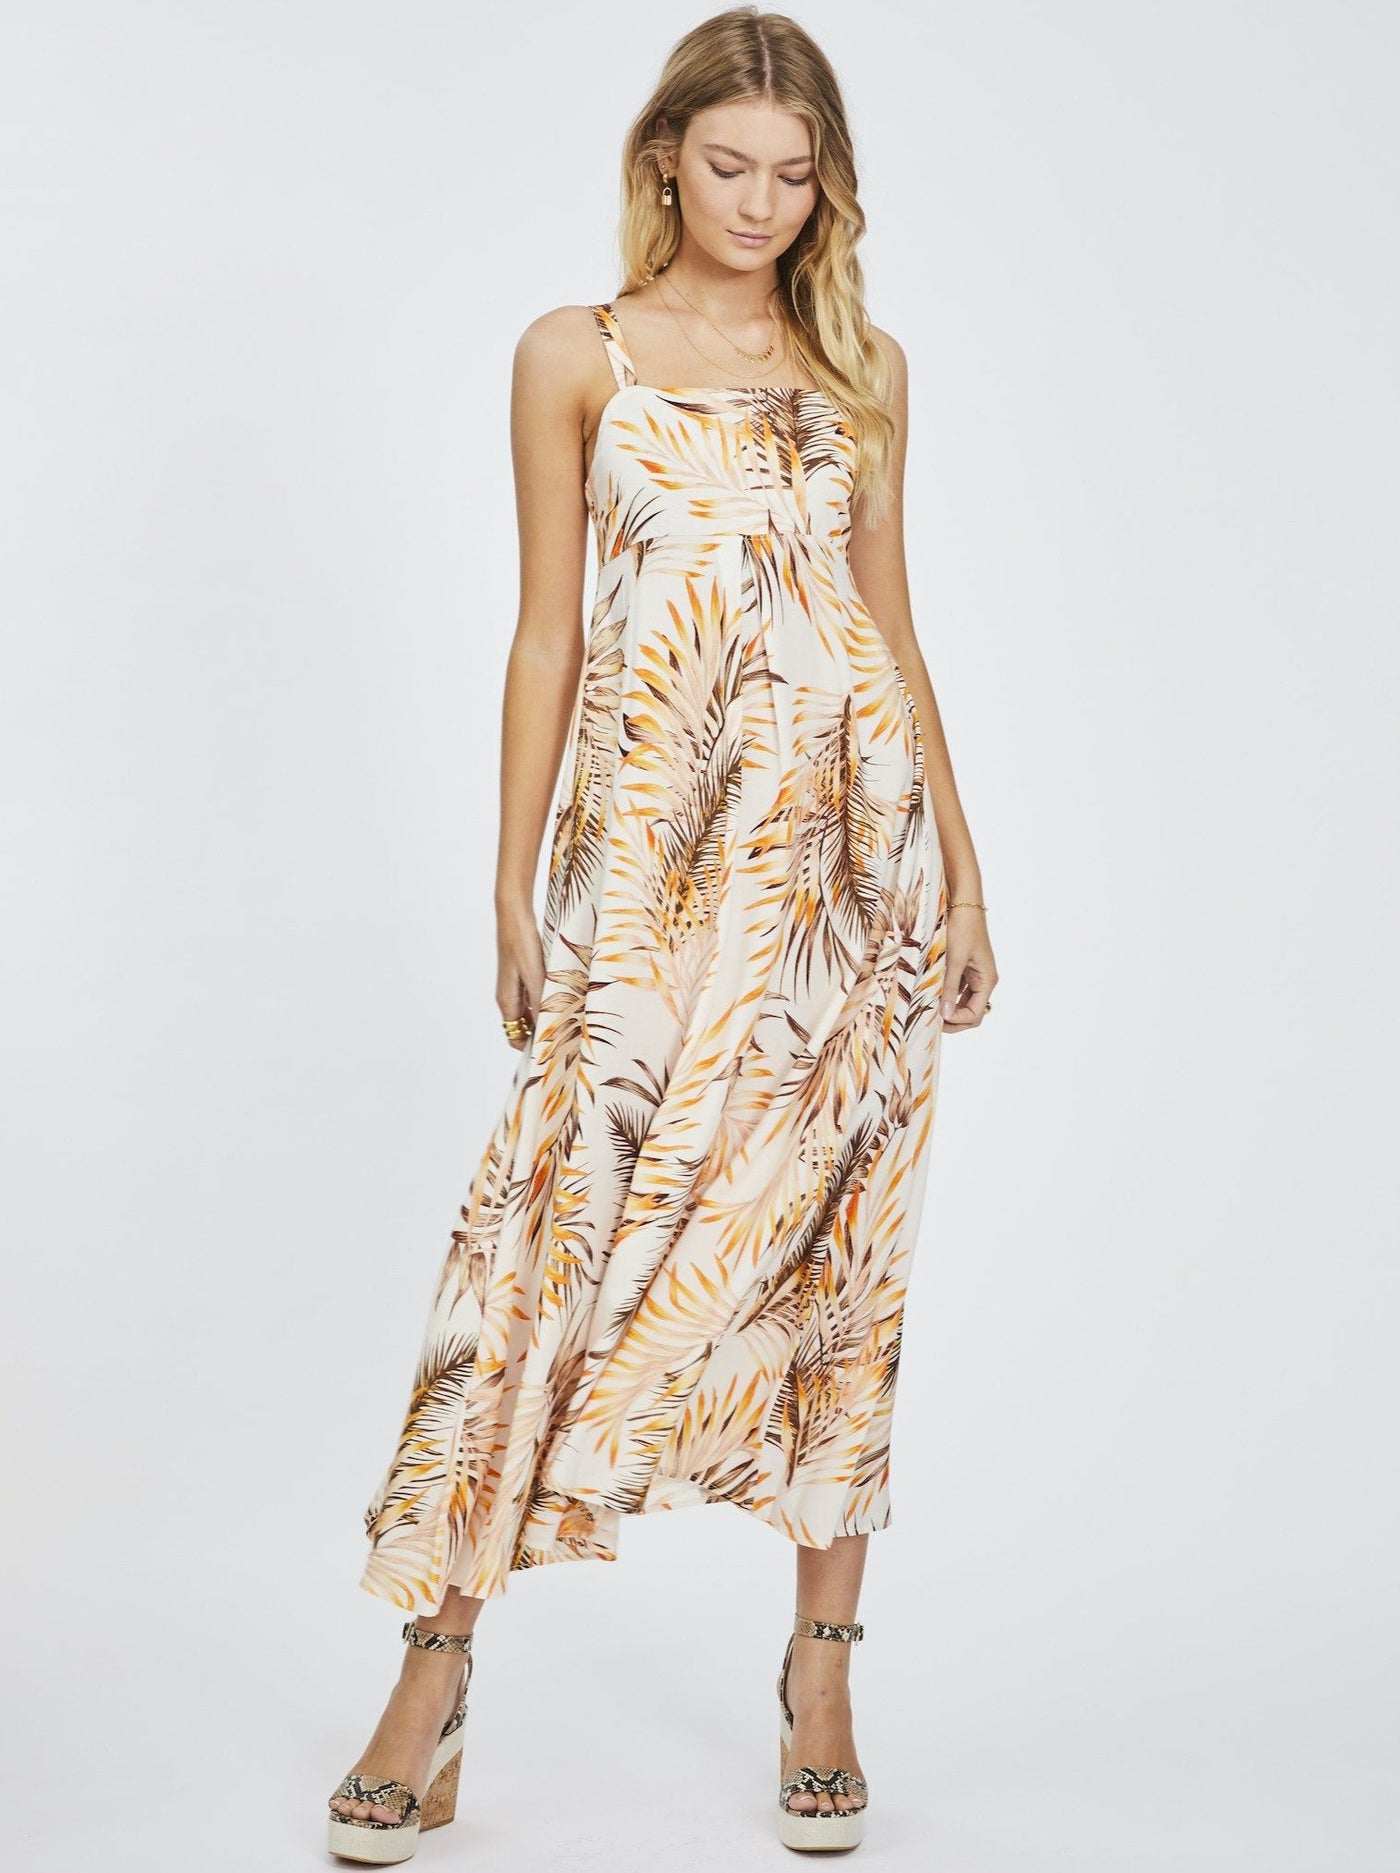 Golden Leaves Print Wide Strap Maxi Dress, Adjustable Straps, Shirred Elastic Panel At Back, Inverted Pleat Under Bodice, Ankle Length, Hand Drawn Exclusive Print, 100% rayon, Designed in Australia